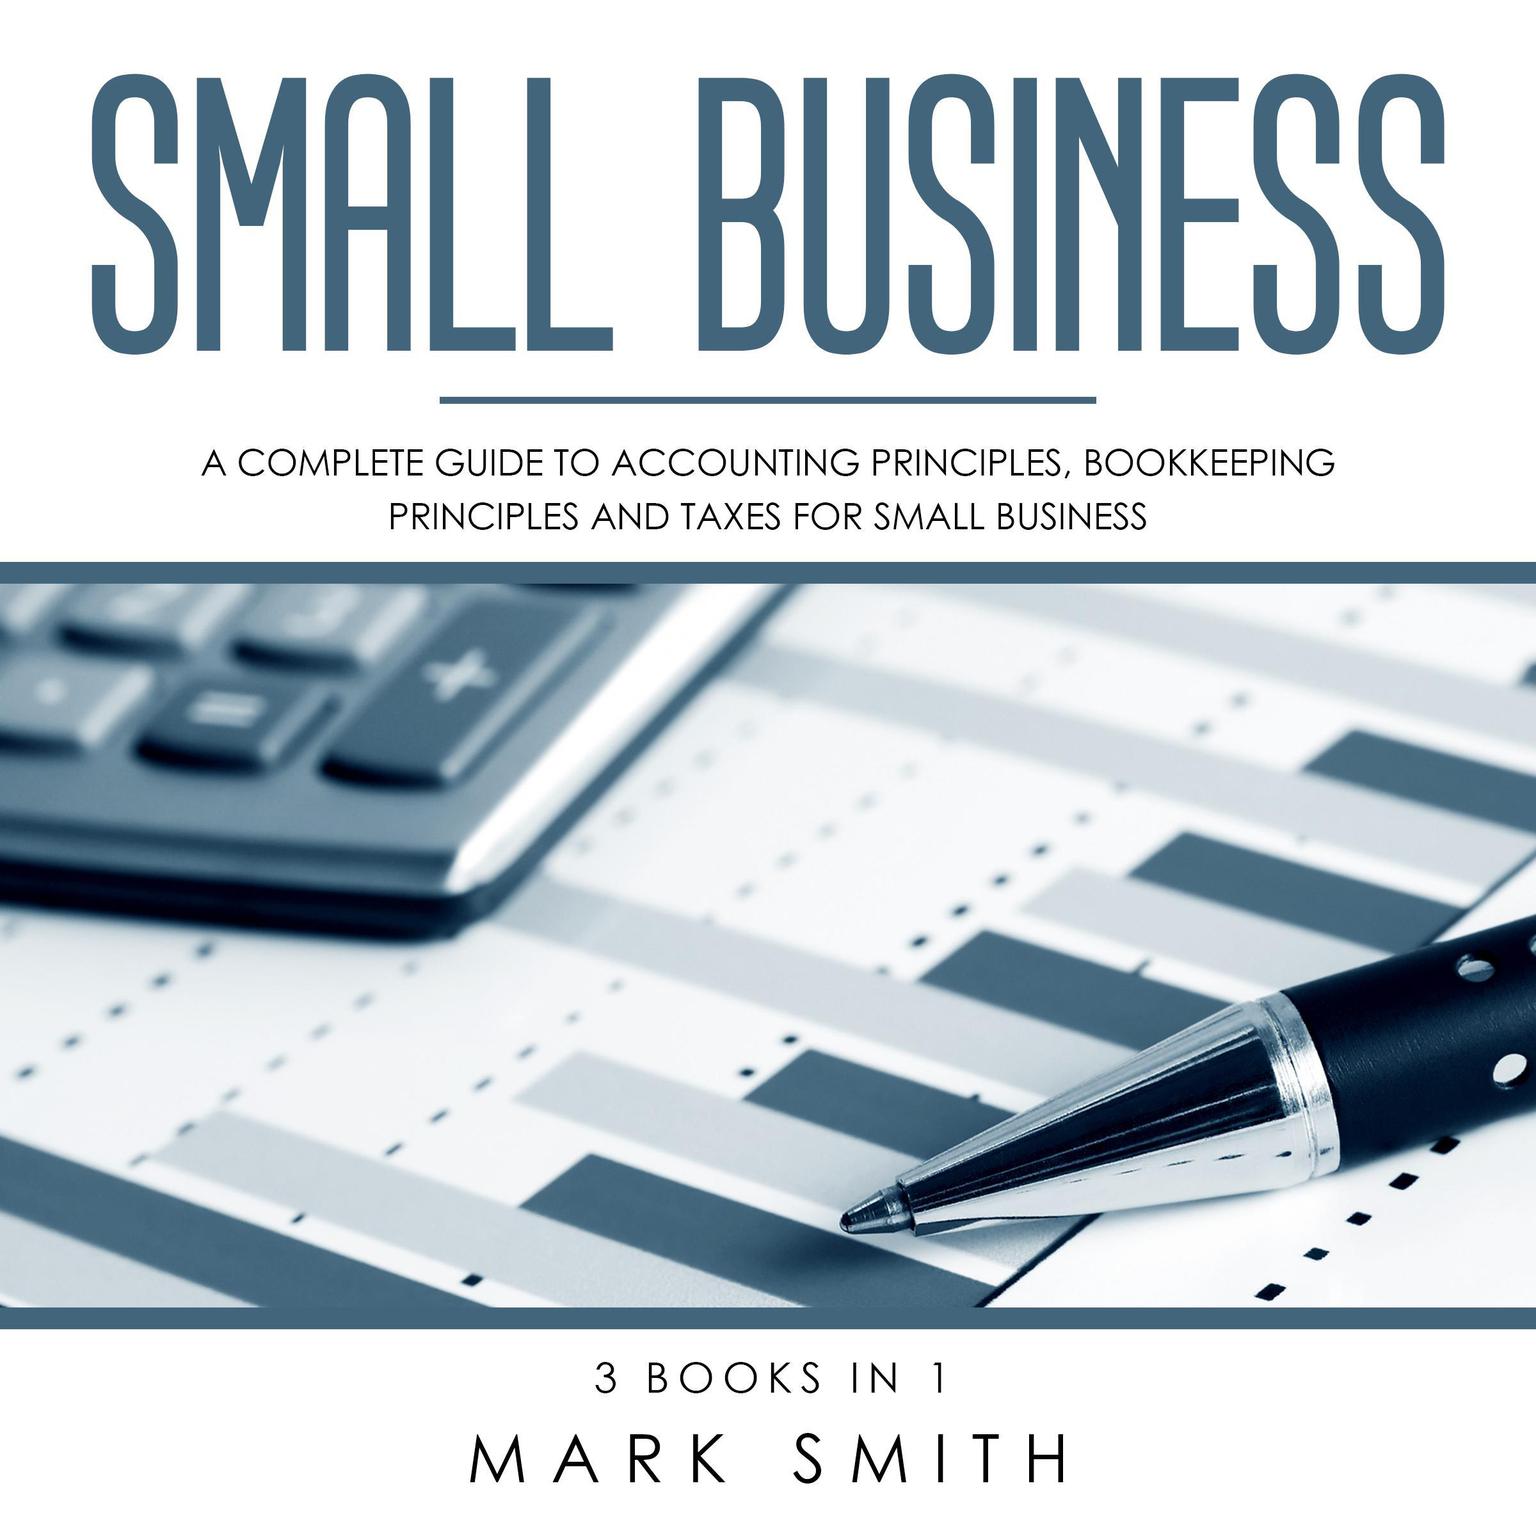 Small Business: A Complete Guide to Accounting Principles, Bookkeeping Principles and Taxes for Small Business Audiobook, by Mark Smith